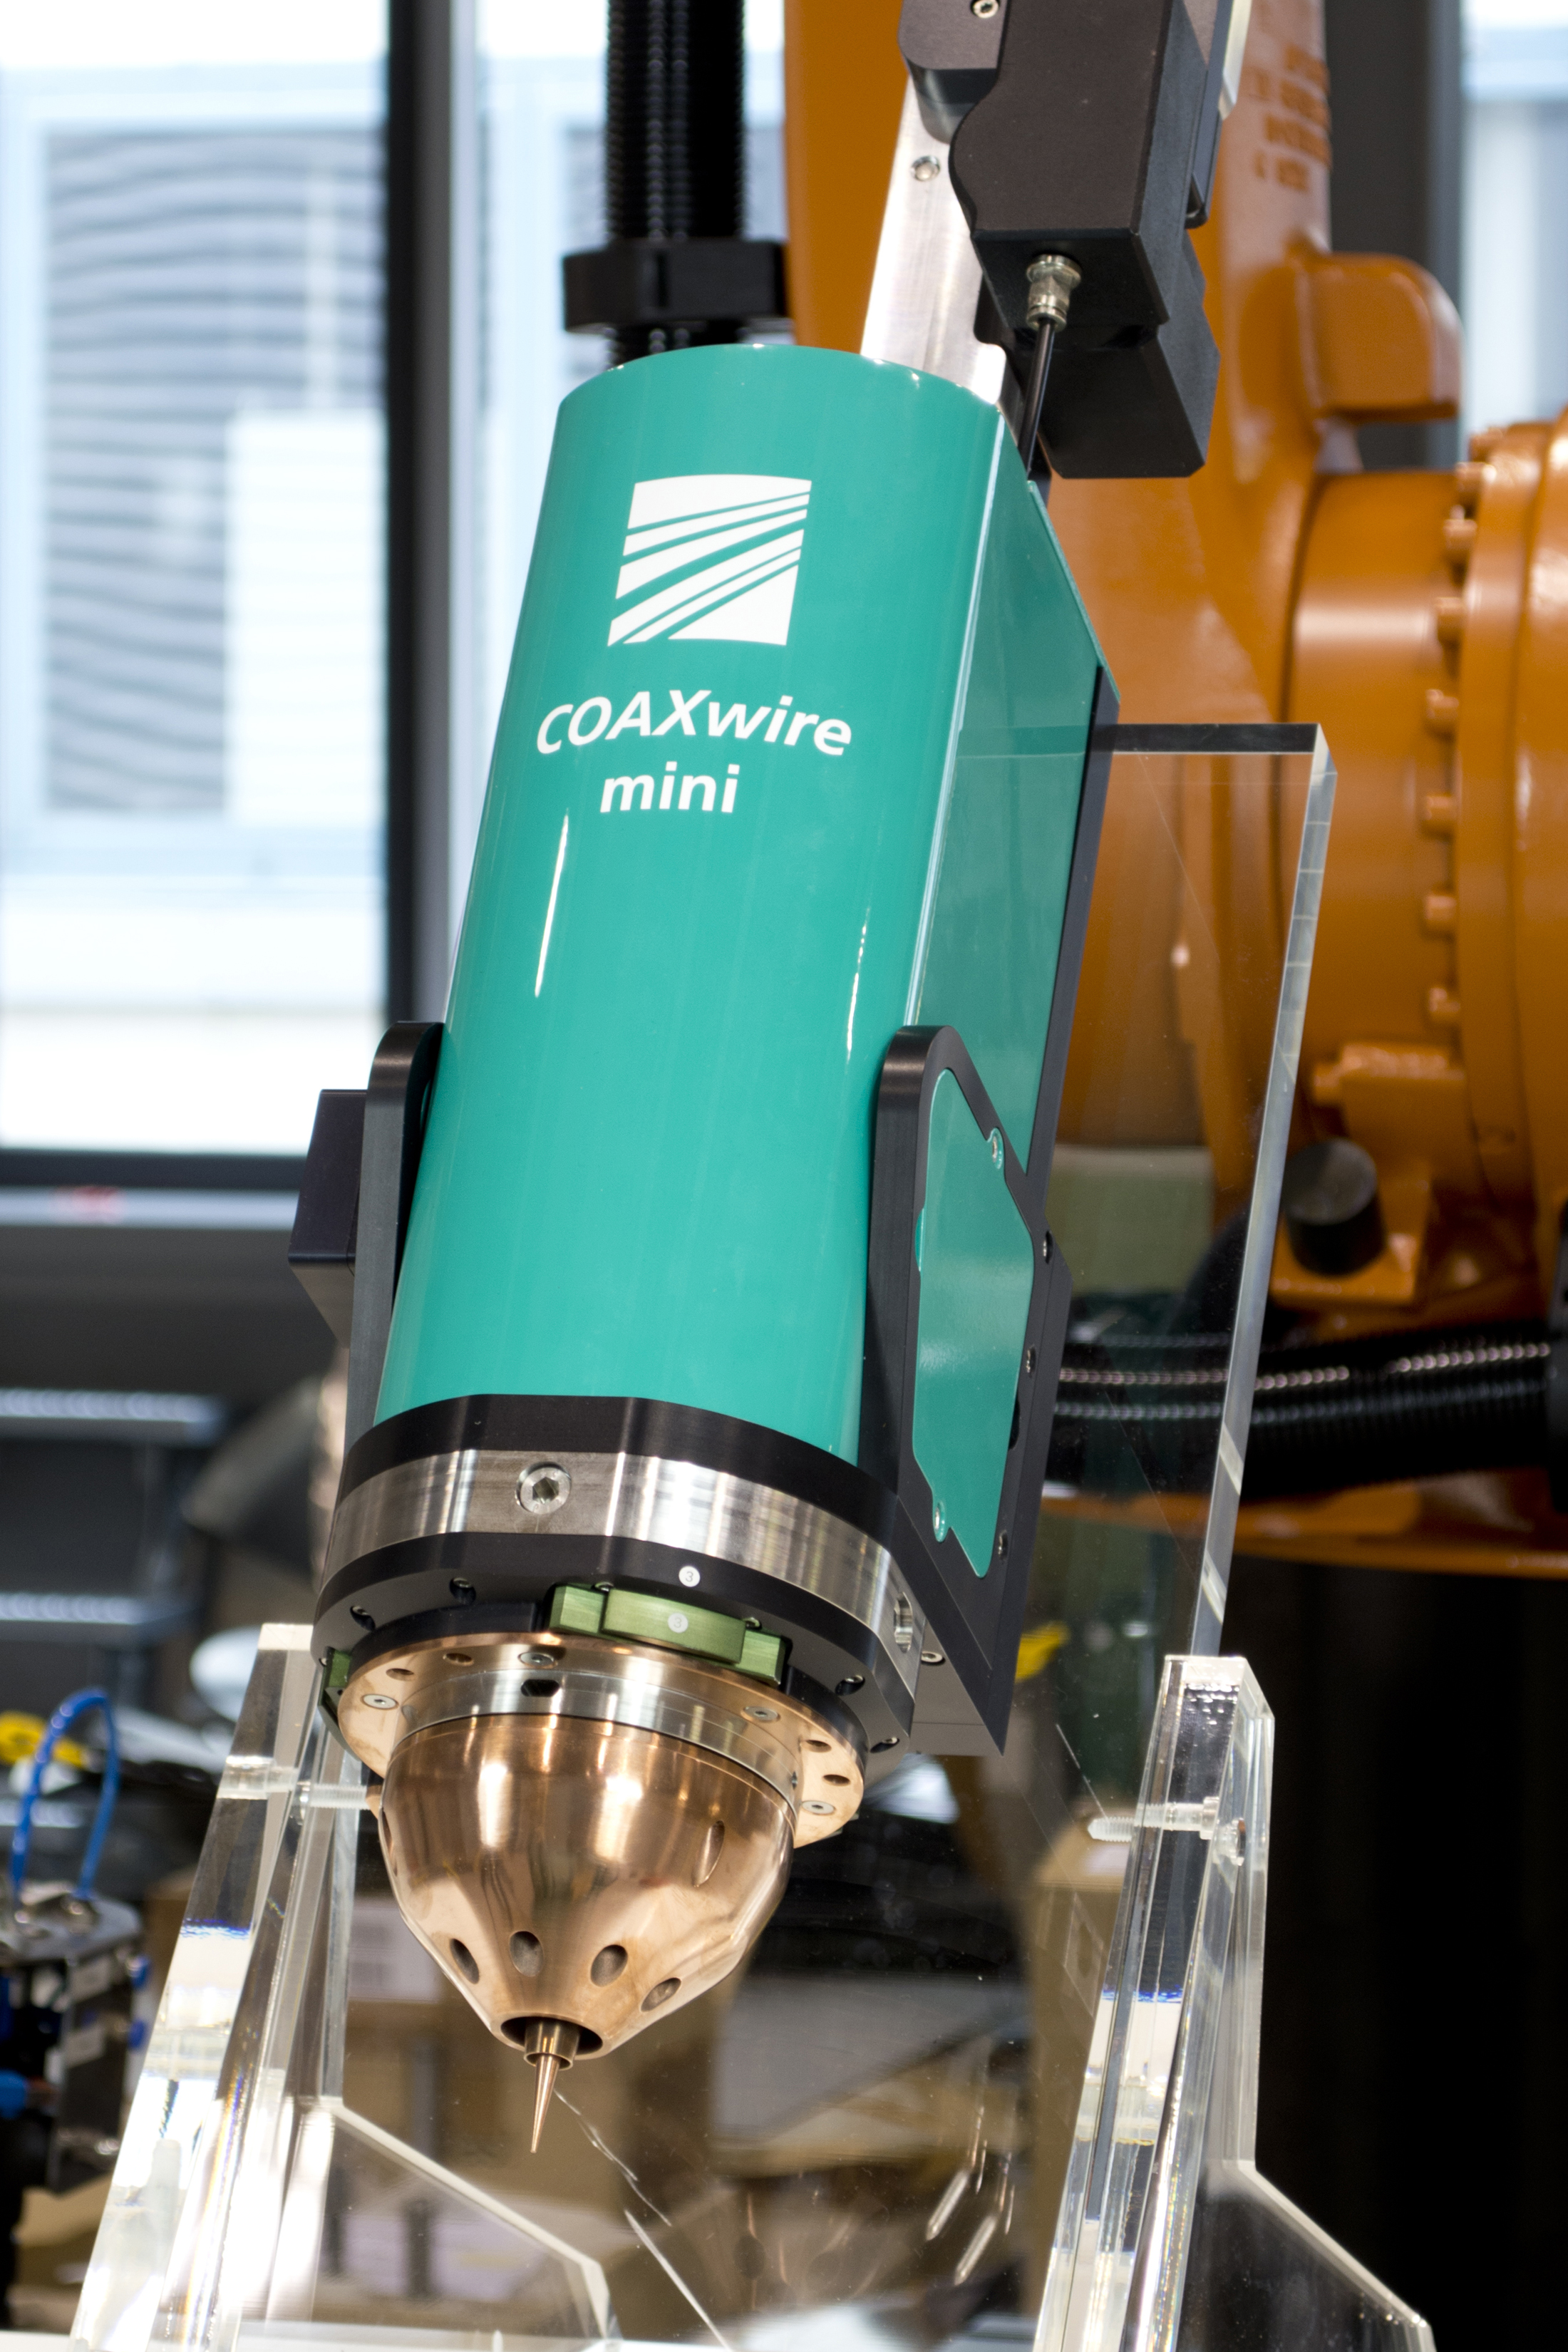 COAXwire mini enables the fabrication of filigree components by means of fine wires.